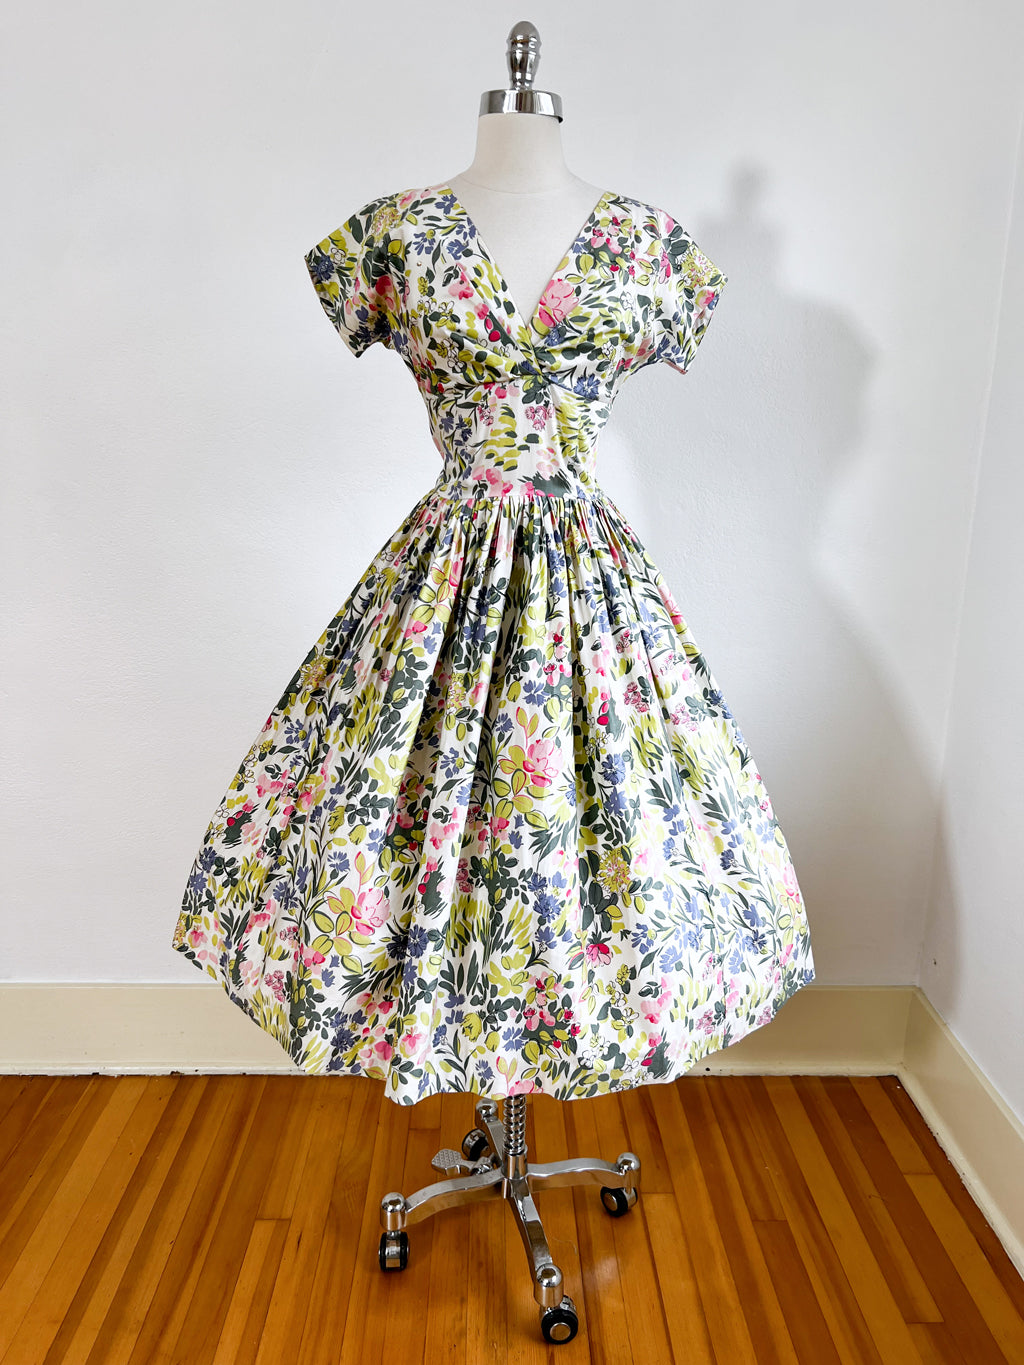 Vintage 1950s Dress - SPECTACULAR Chartreuse Sage Pink Floral Print Party Junior Time Sundress w Rhinestones Size XS to S